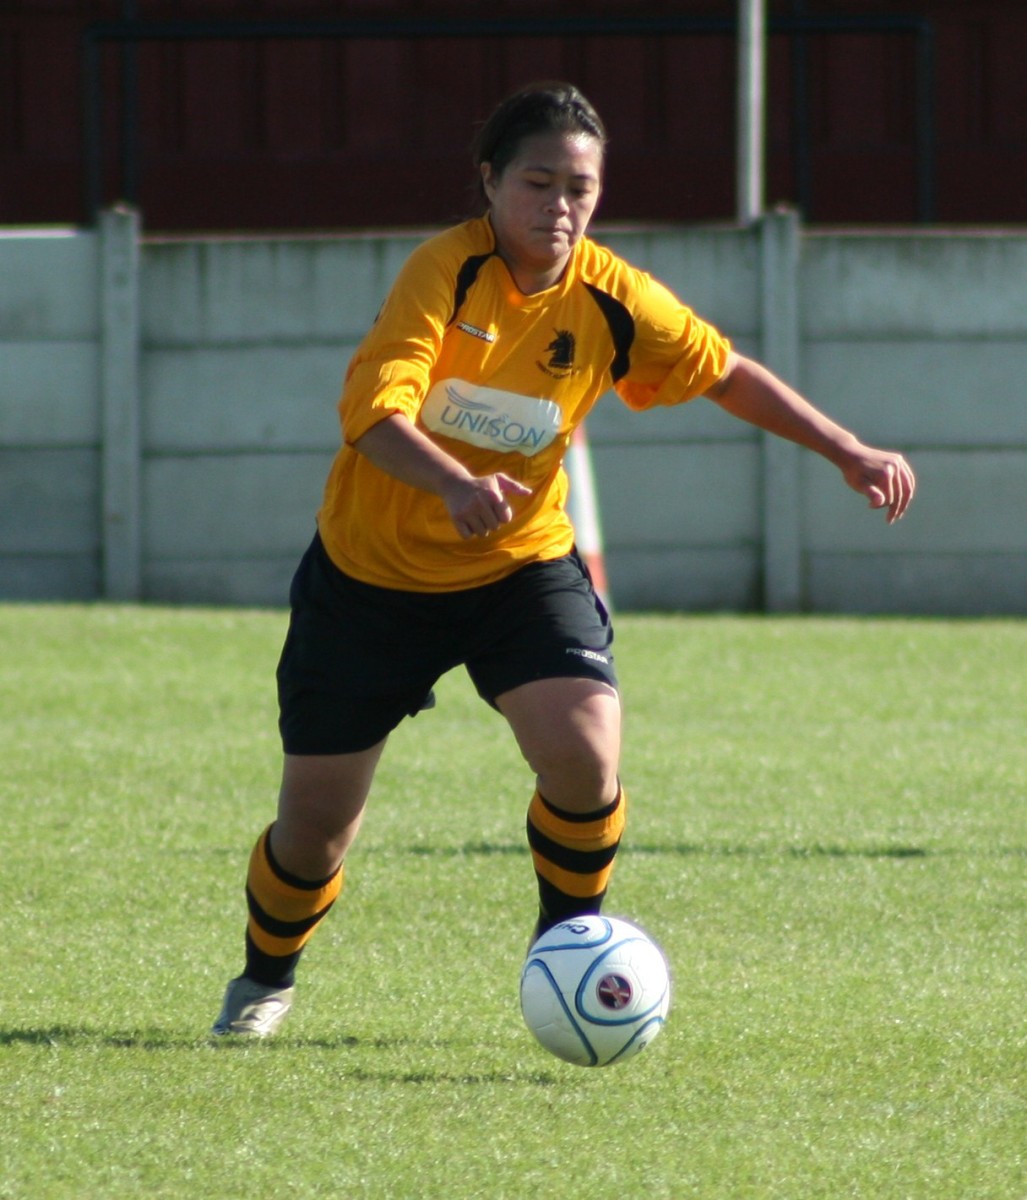 28 Sep - Ossett Albion Ladies v Dearne and District Ladies (